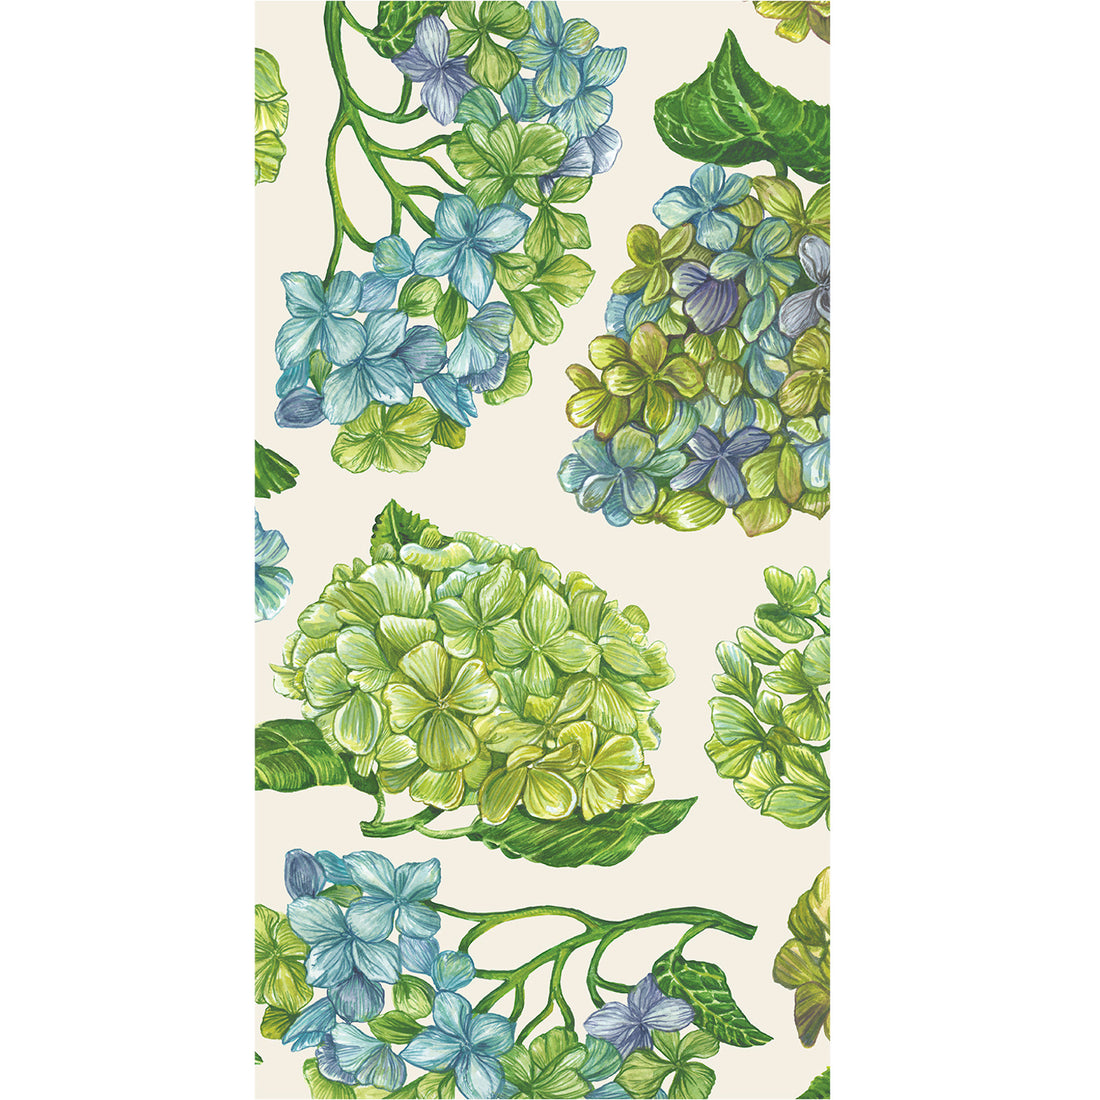 A rectangle guest napkin featuring green and blue illustrated hydrangea blossoms scattered over a white background.